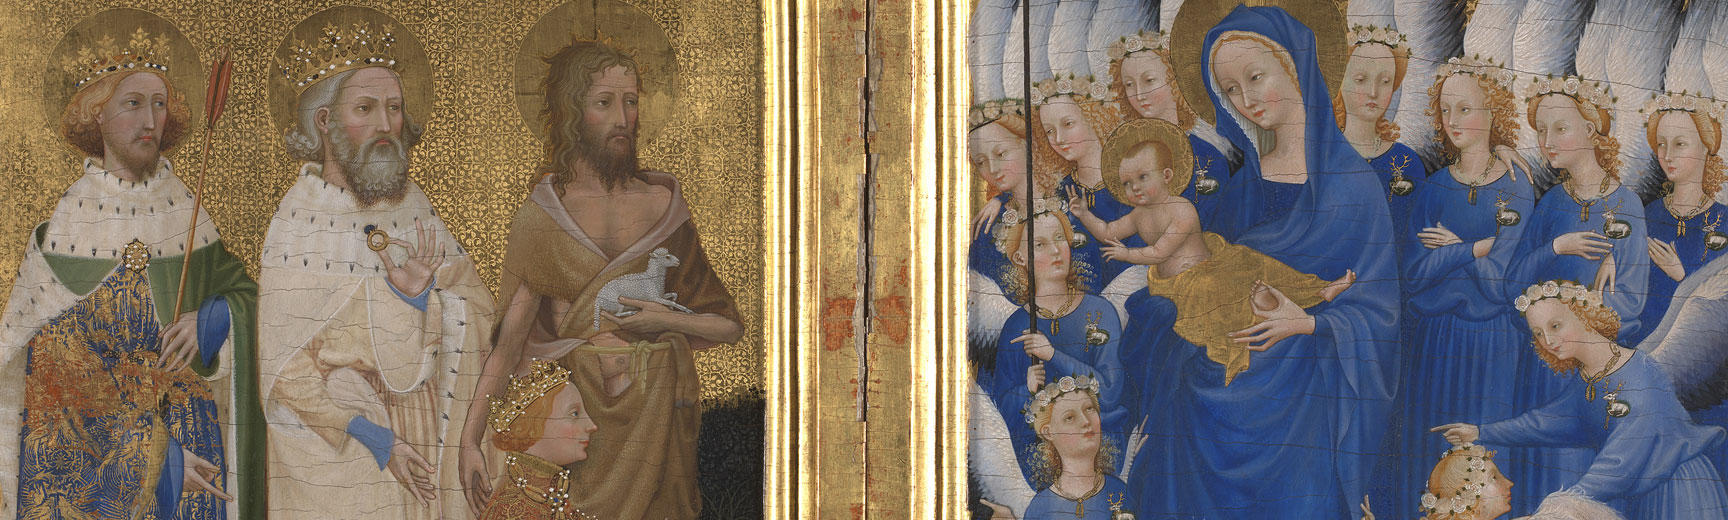 The Wilton Diptych an English panel painting